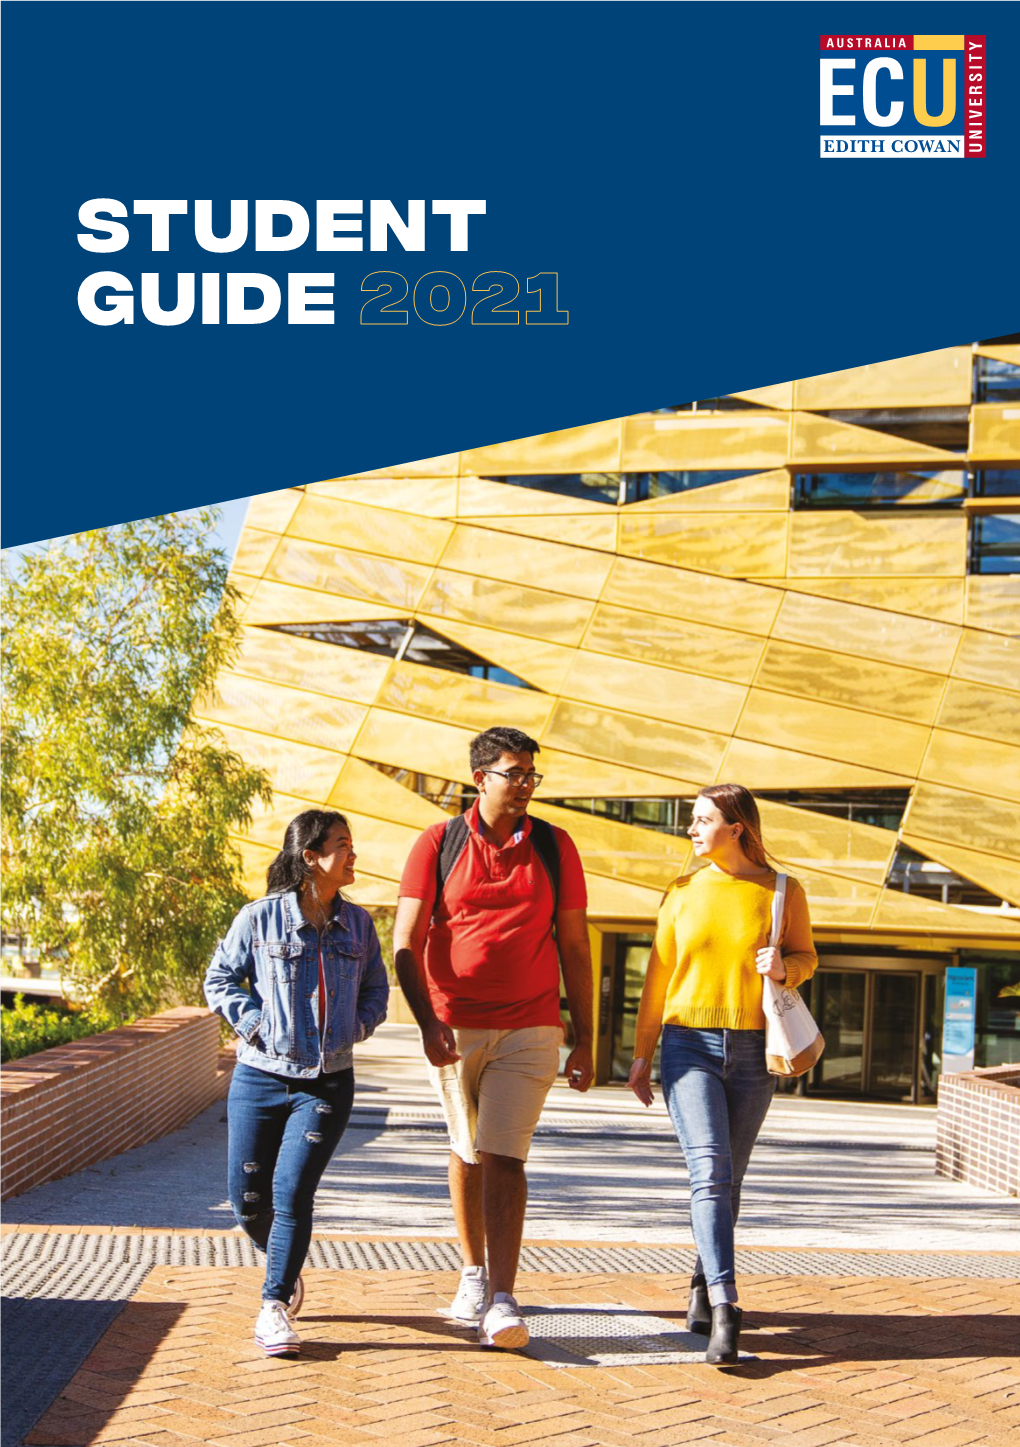 Student Guide 2021 Your Key Contacts